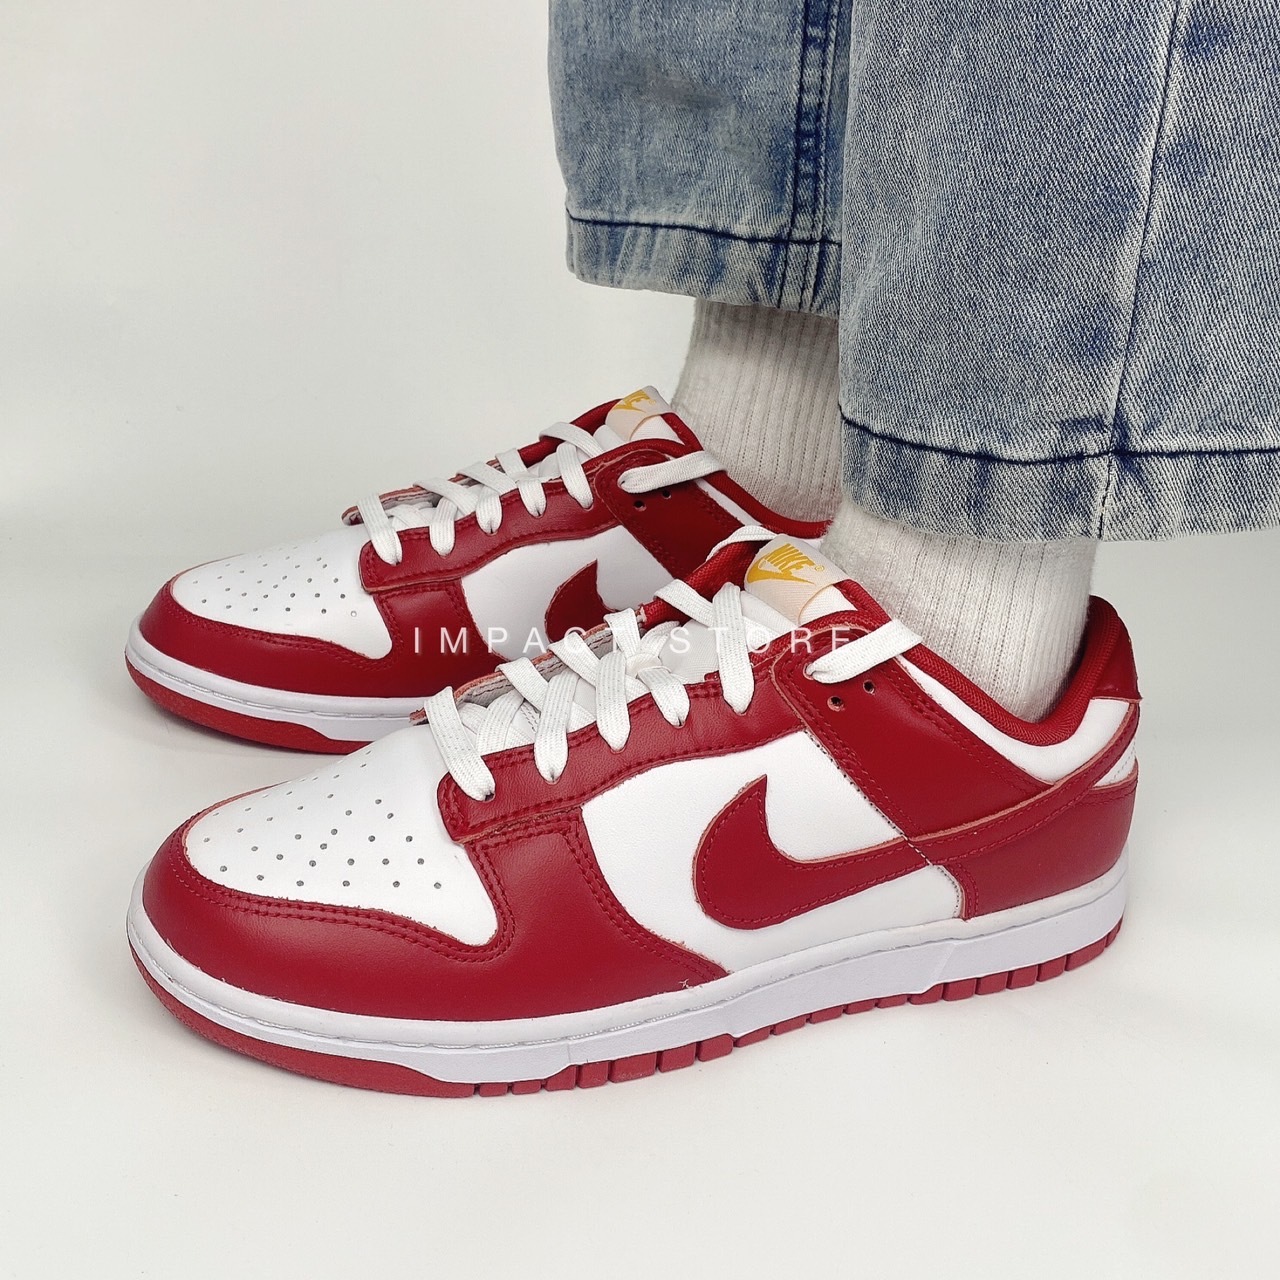 Nike Dunk Low White/Gym Red DD1391-602